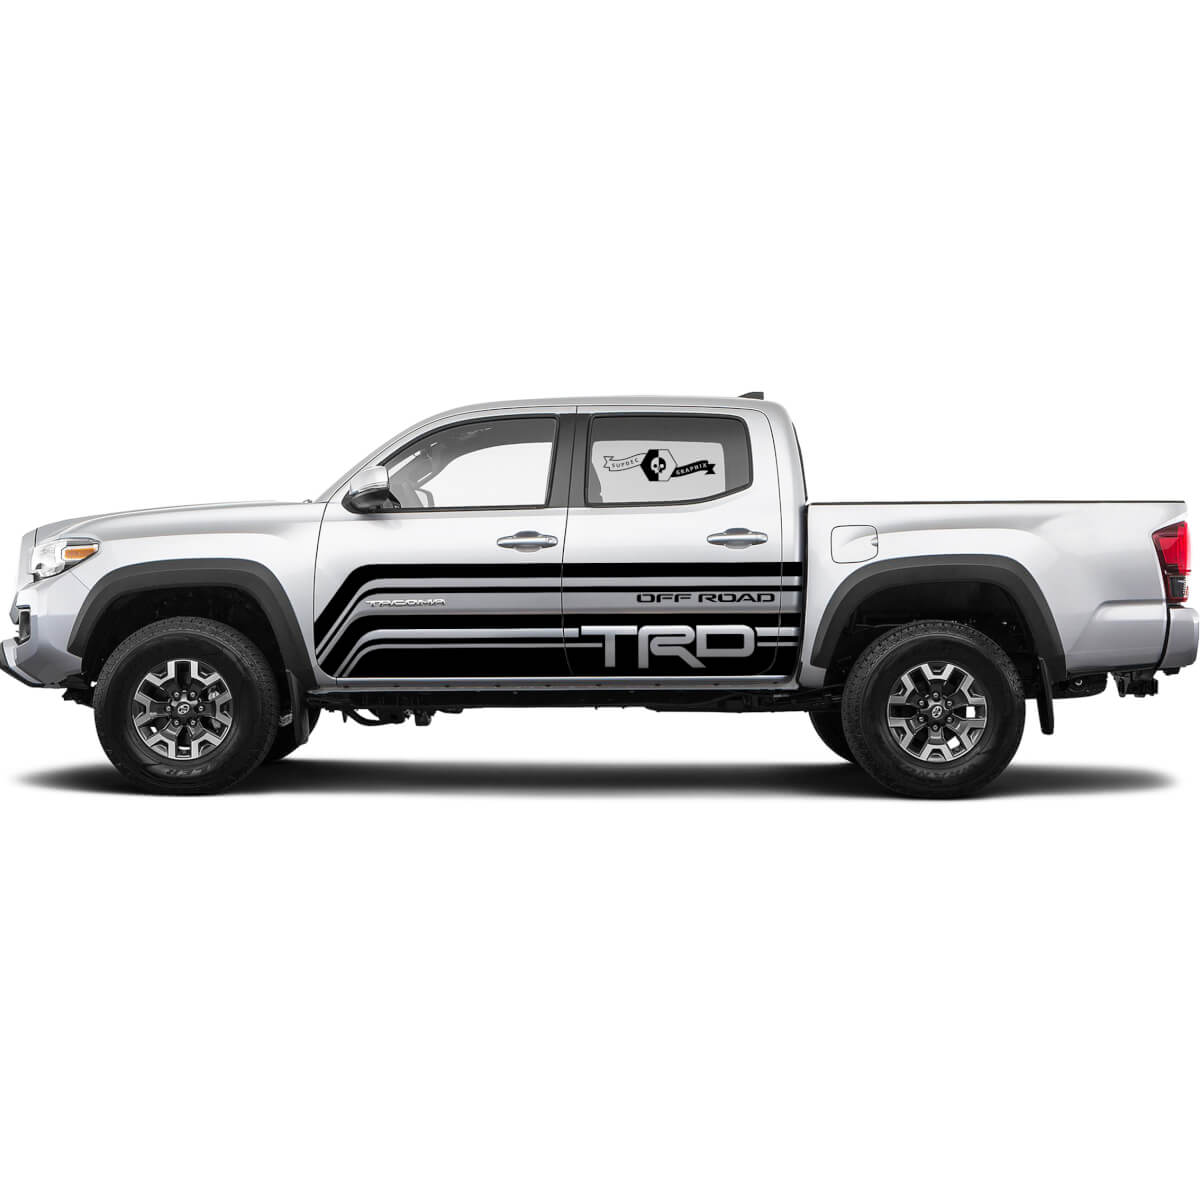 TRD Toyota Racing Style for Rocker Panel and Doors Decals Stickers for Tacoma FJ Cruiser Tundra Hilux 4Runner